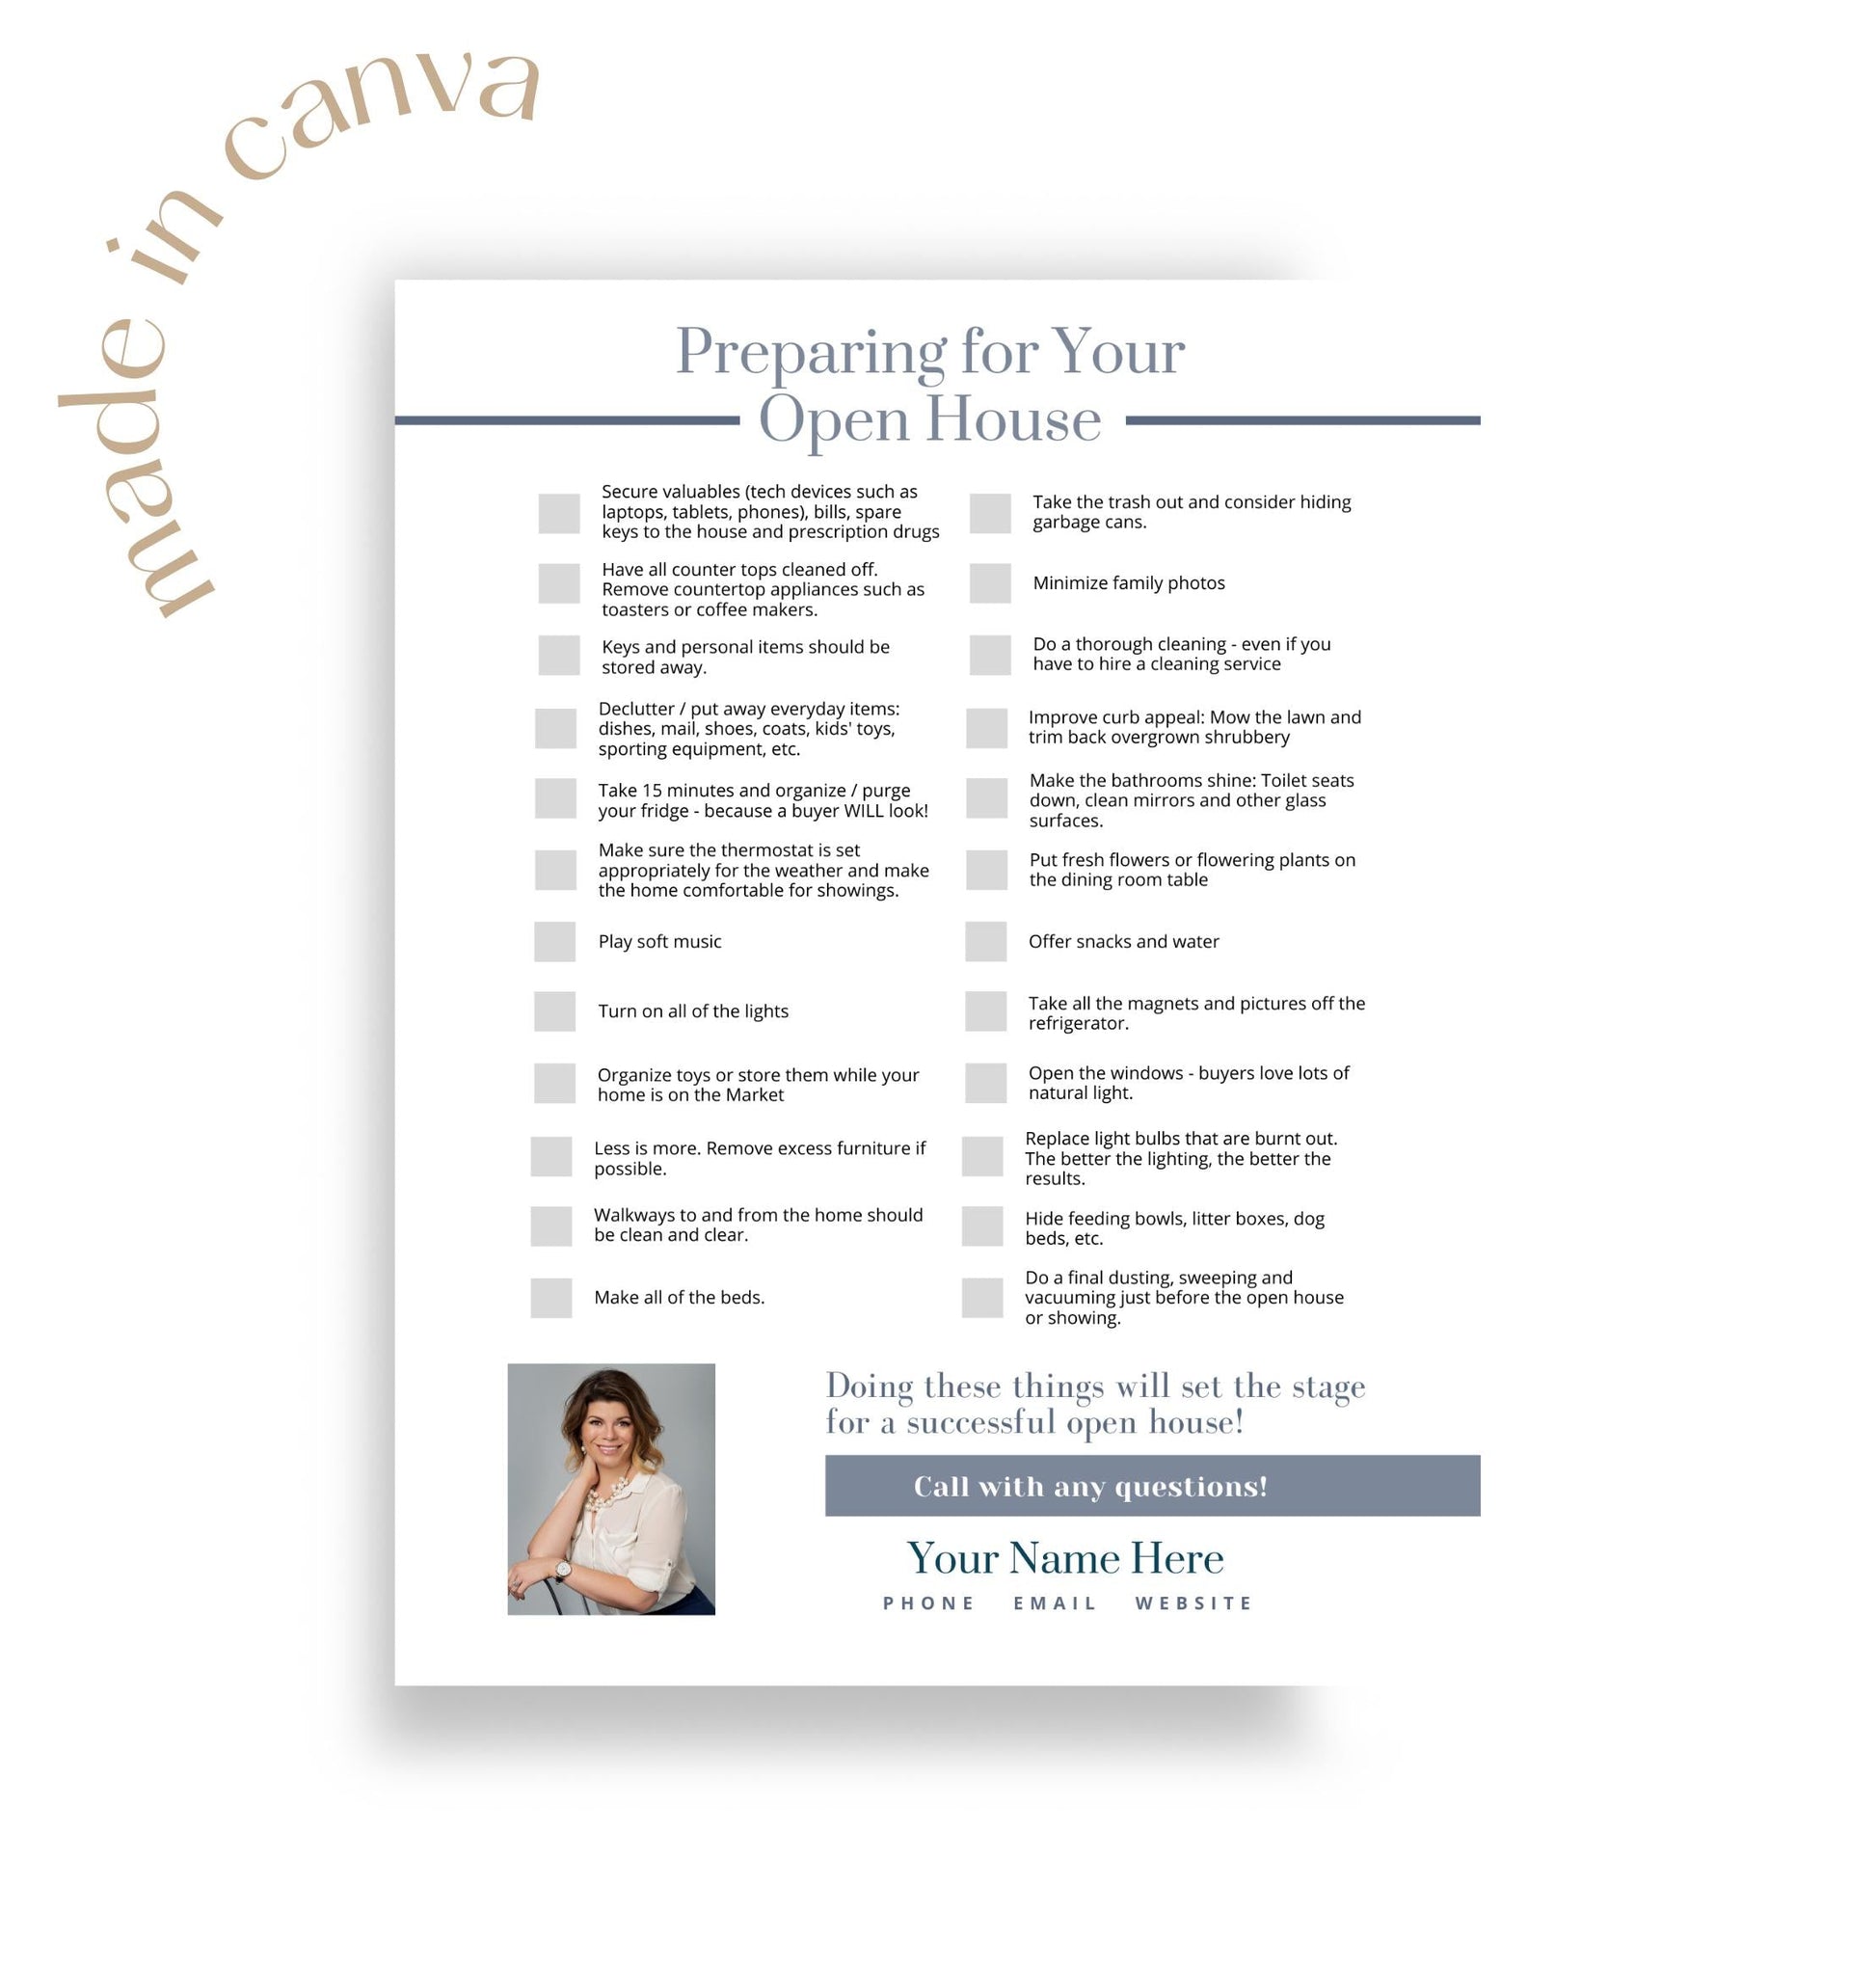 Made in Canva - Real Estate Agent, Realtor Prepare for Your Open House Flyer Handout